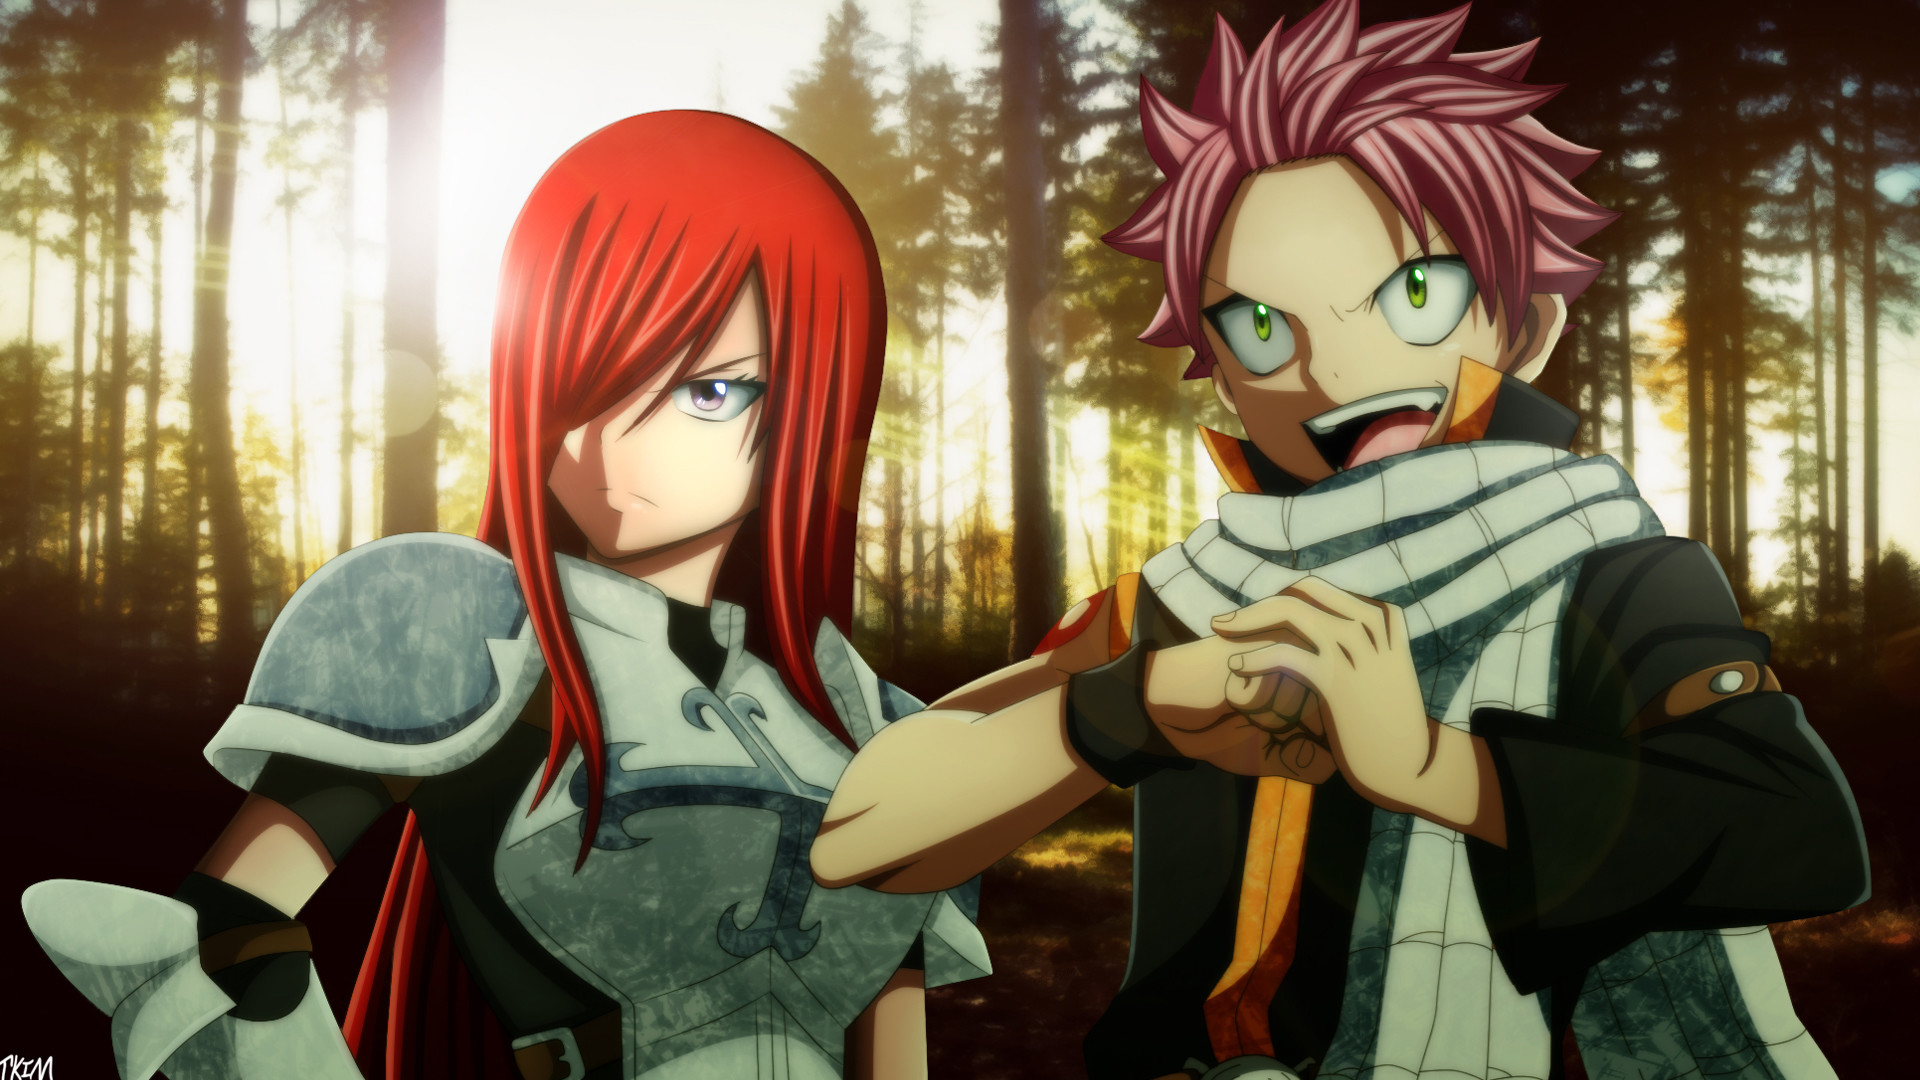 Natsu dragneel and erza scarlet fairy tail anime